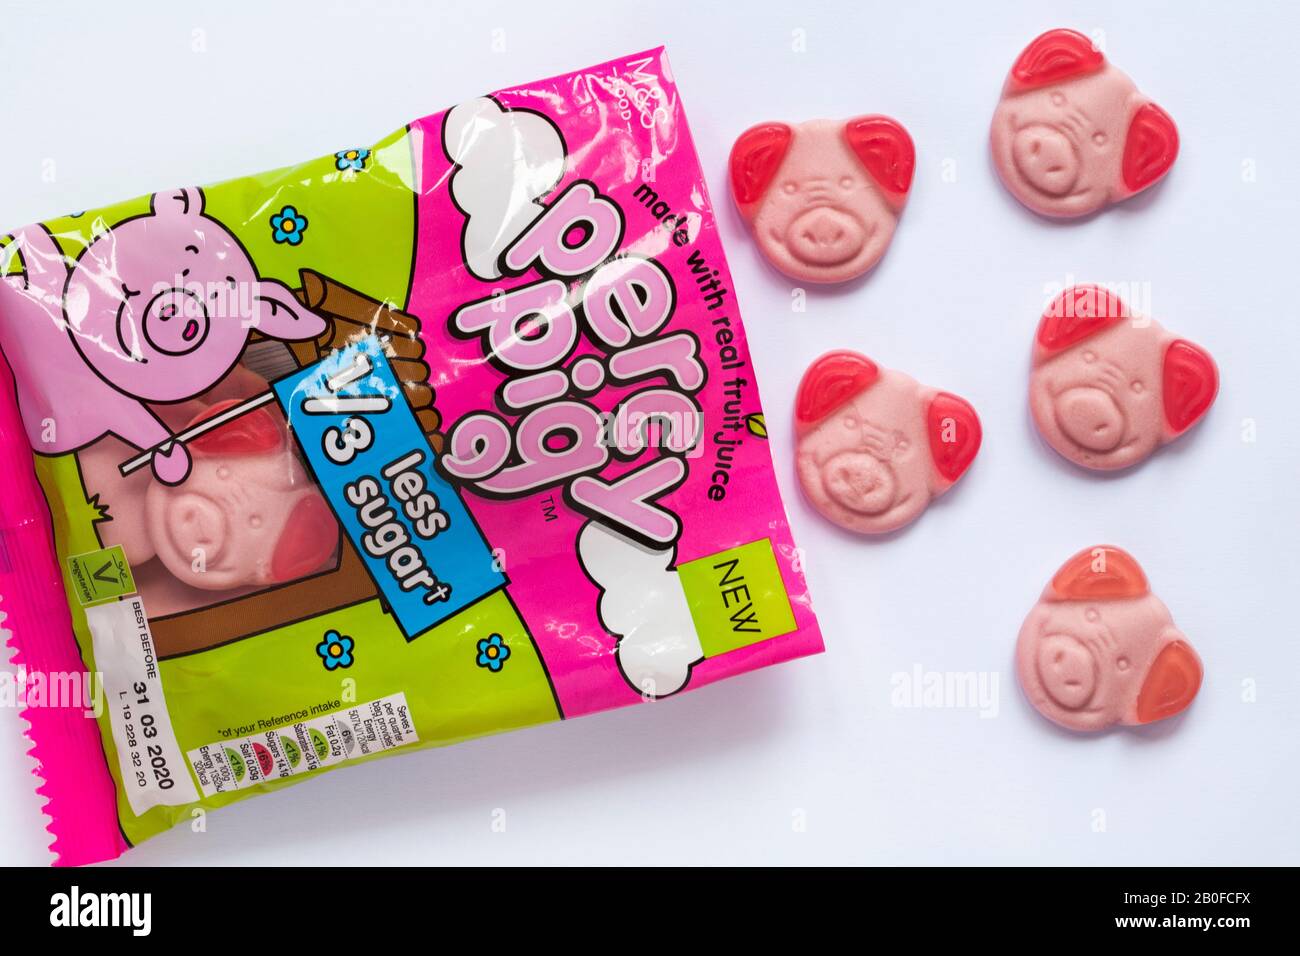 Bag of M&S Percy Pig sweets with 1/3 third less sugar soft fruit flavour gums made with real fruit juice open to show contents set on white background Stock Photo